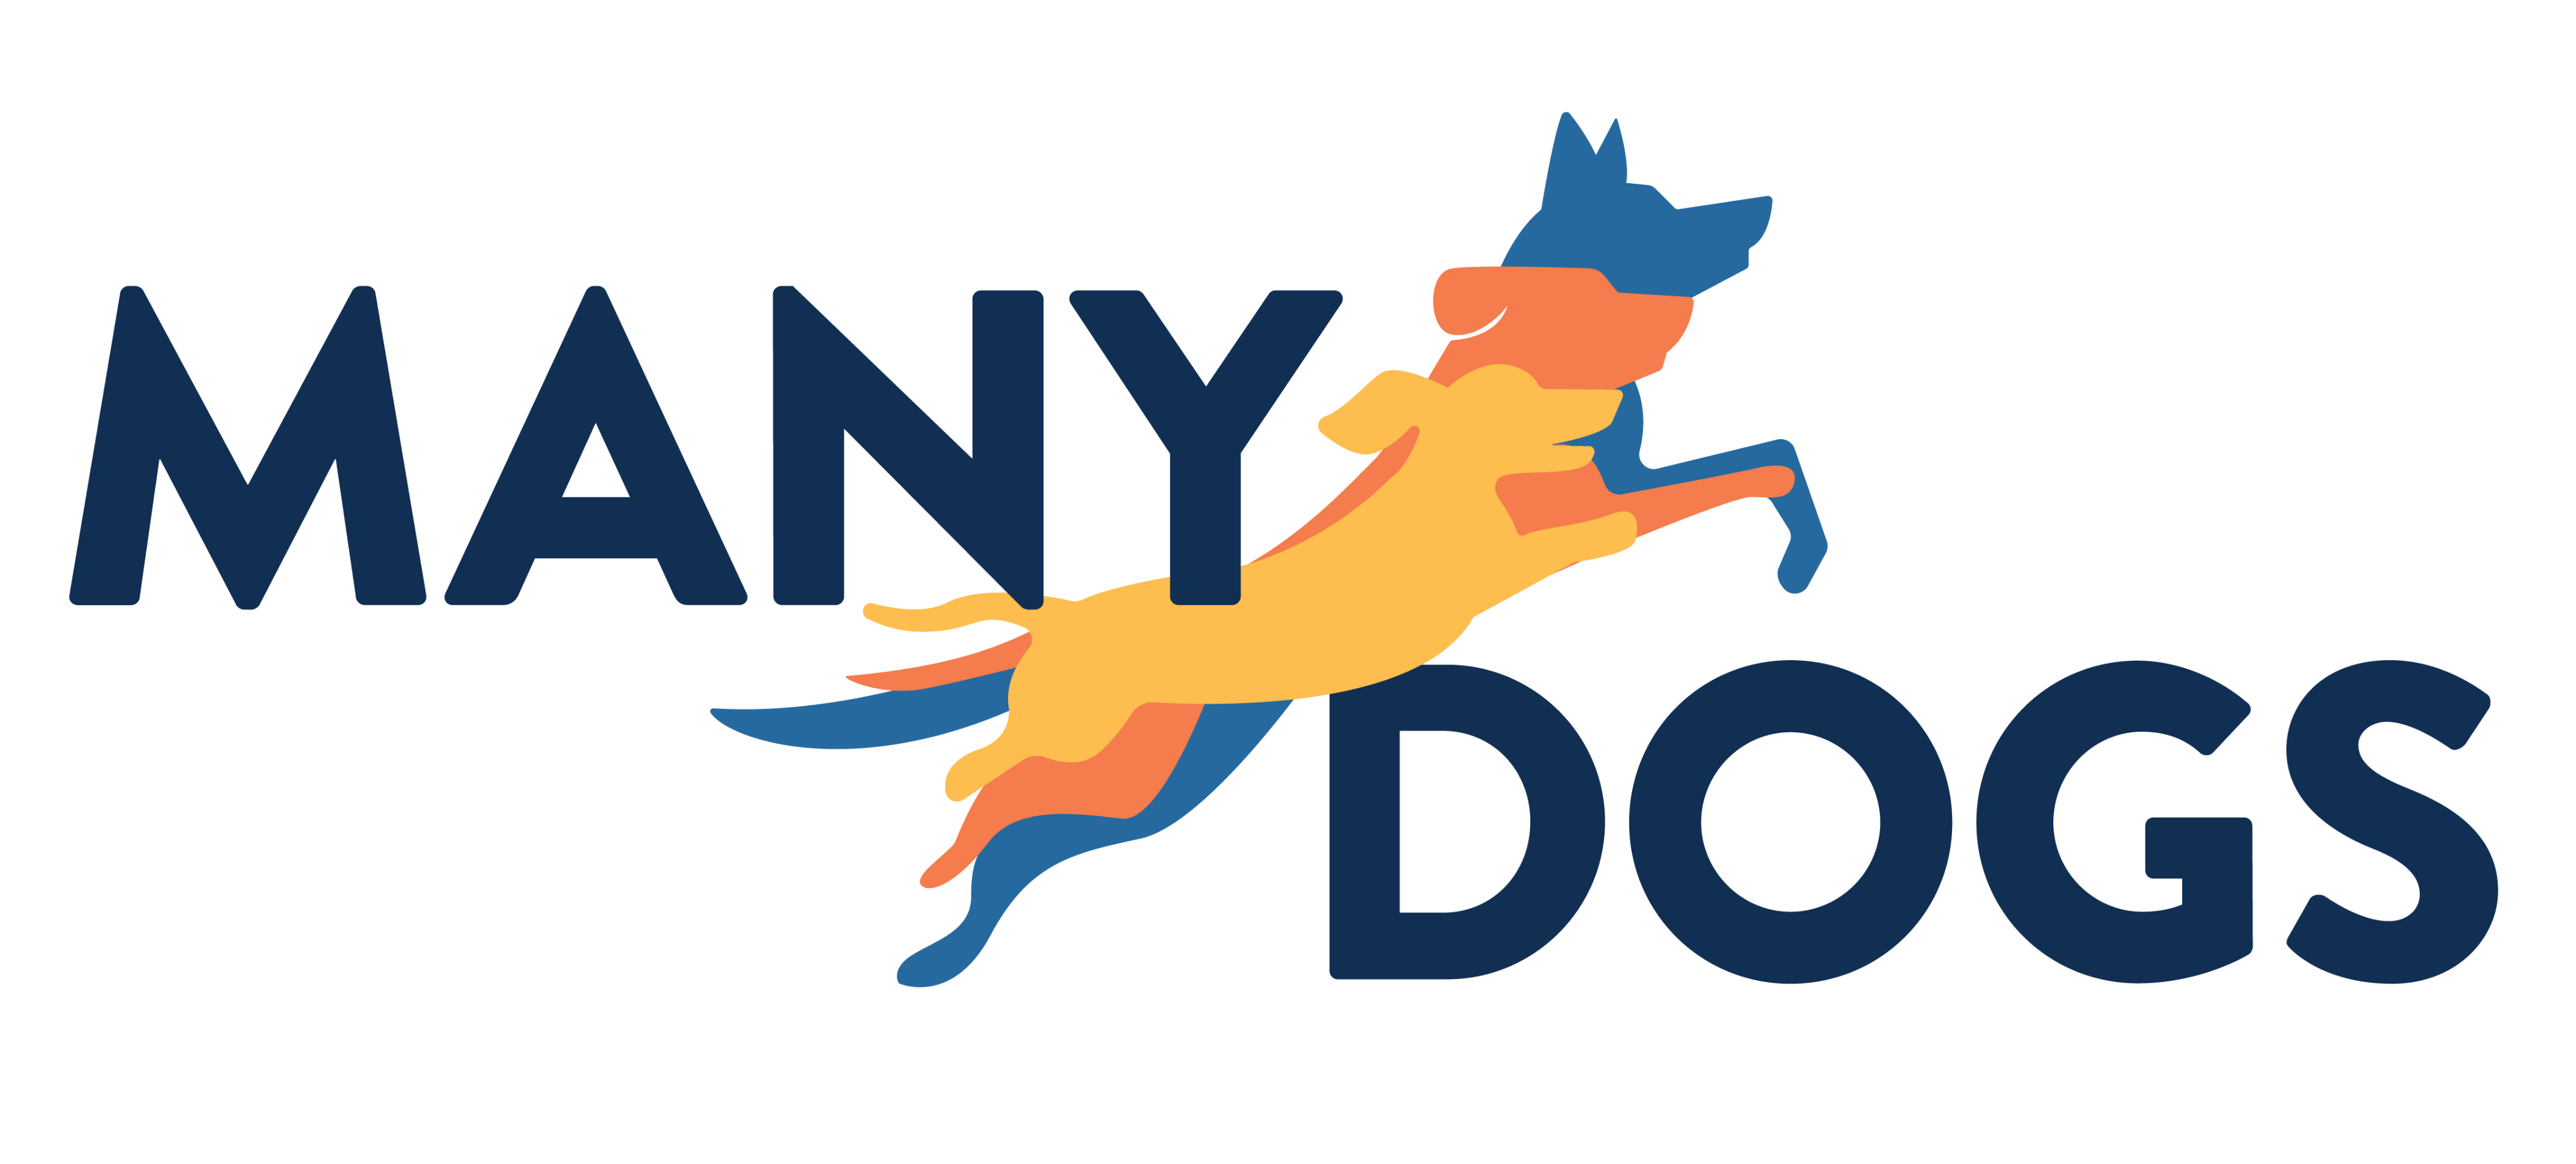 ManyDogs banner with the words Many Dogs and three overlaid dog silouettes (yellow dachshund, orange Laborador retriever, and blue German shepard) jumping in the air.